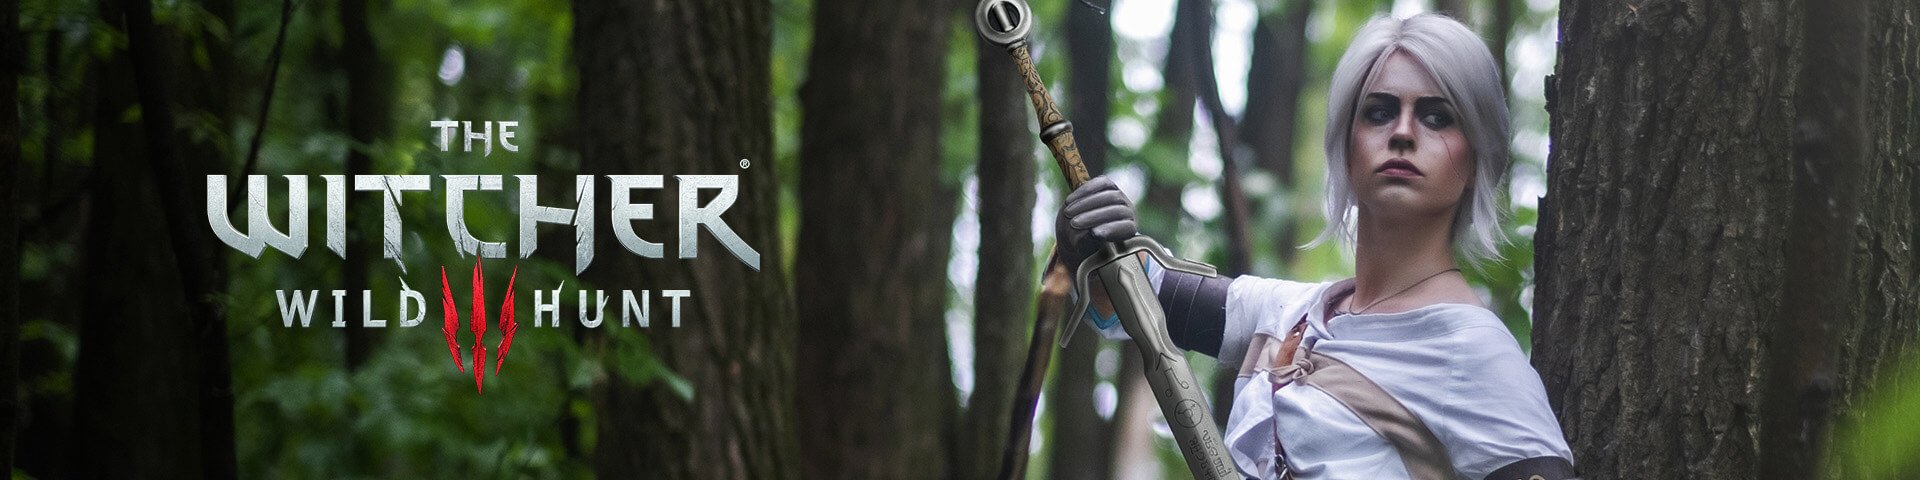 ciri-sword-the-witcher-product-top-banner